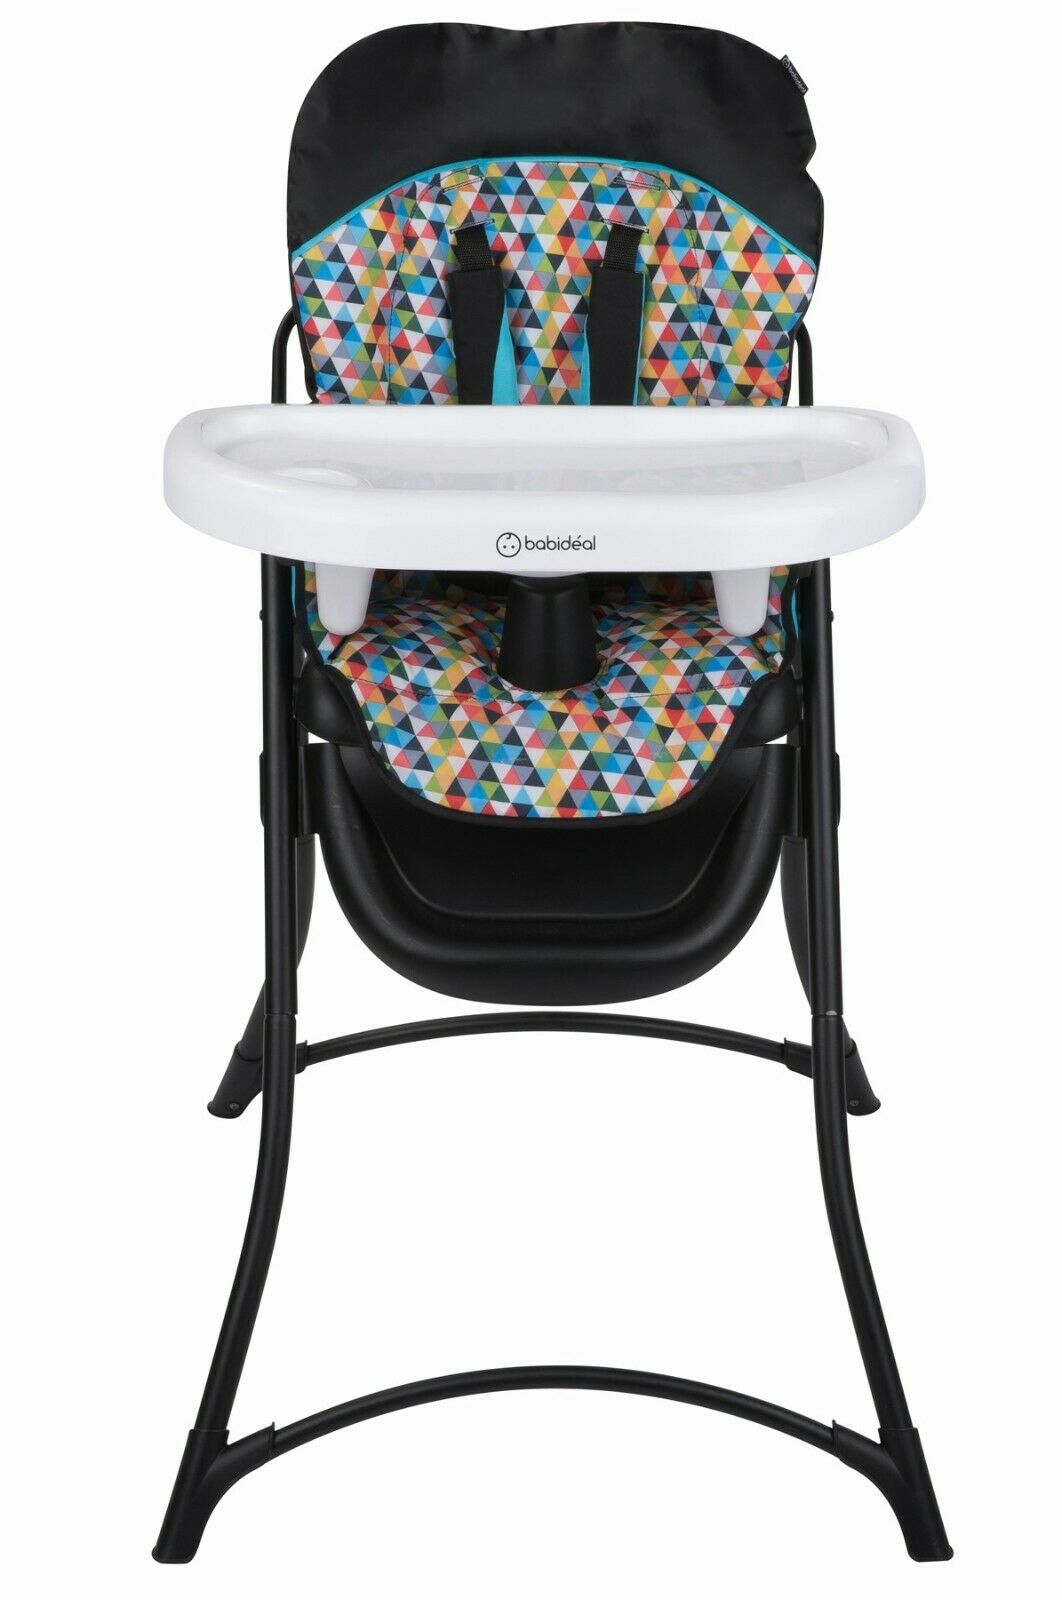 Foldable Baby Stroller Travel System with Car Seat Infant Playard High Chair Set